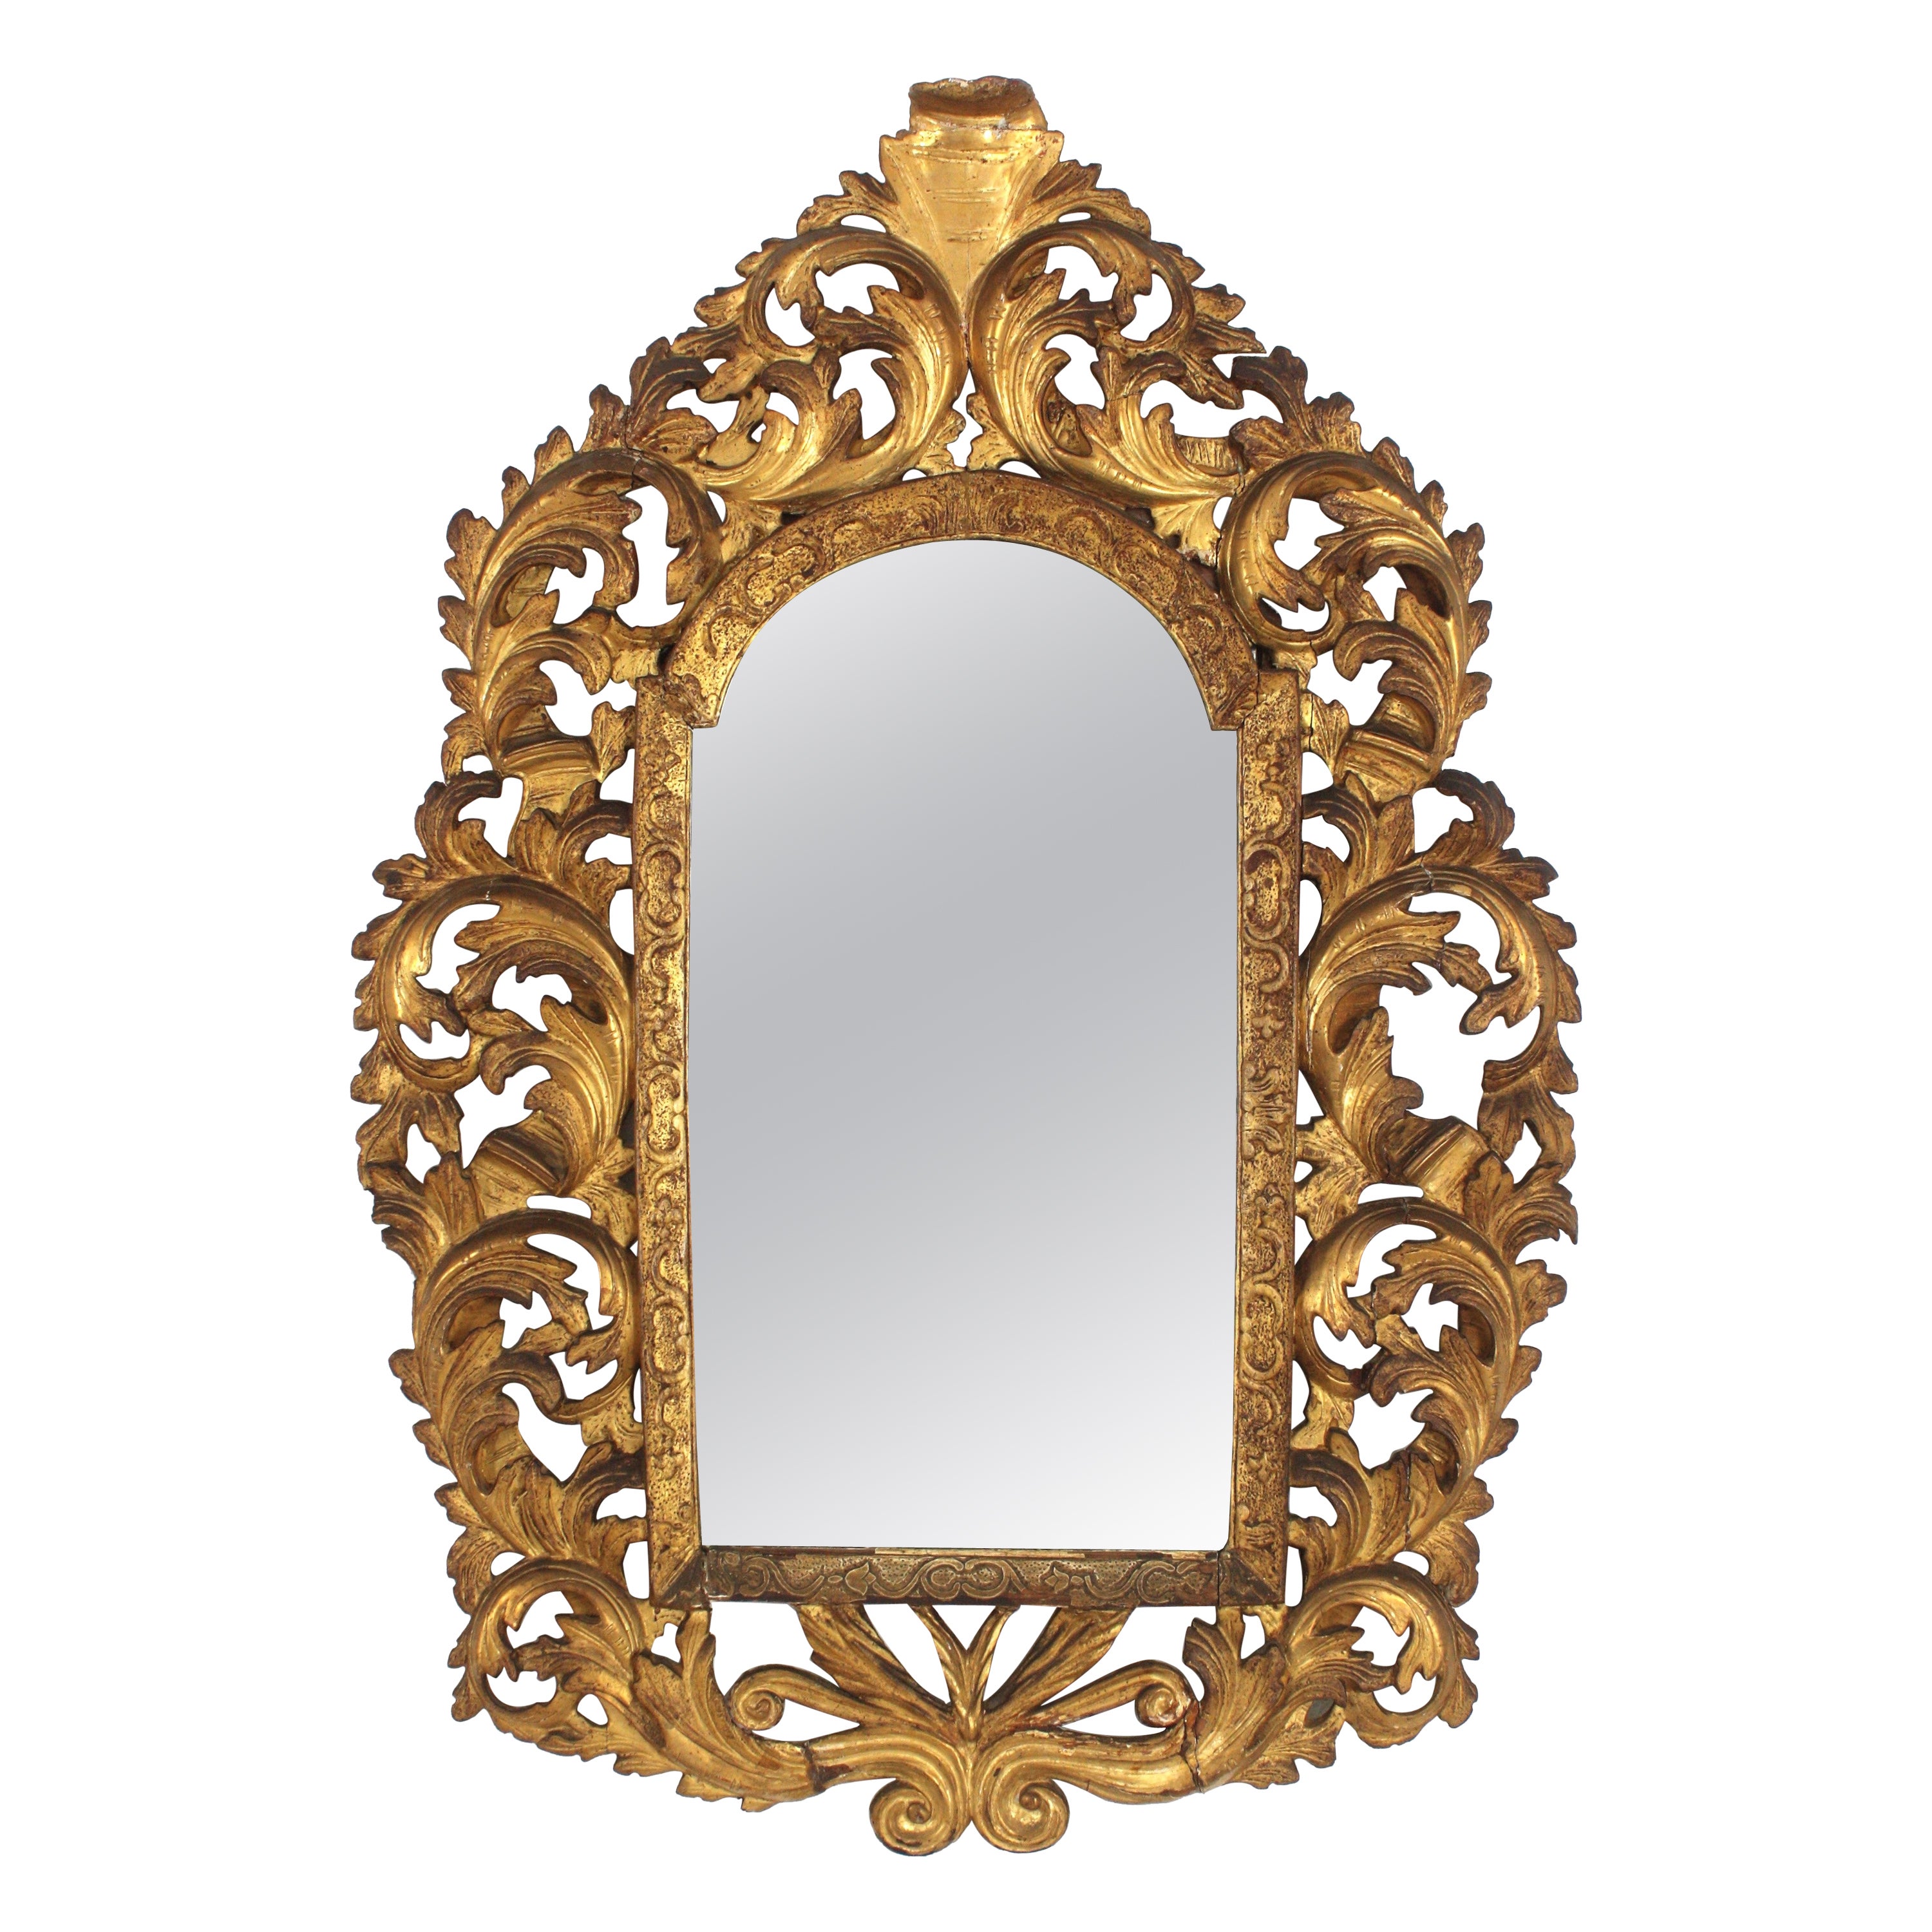 Florentine Giltwood Mirror with Foliage Frame and Arched Top